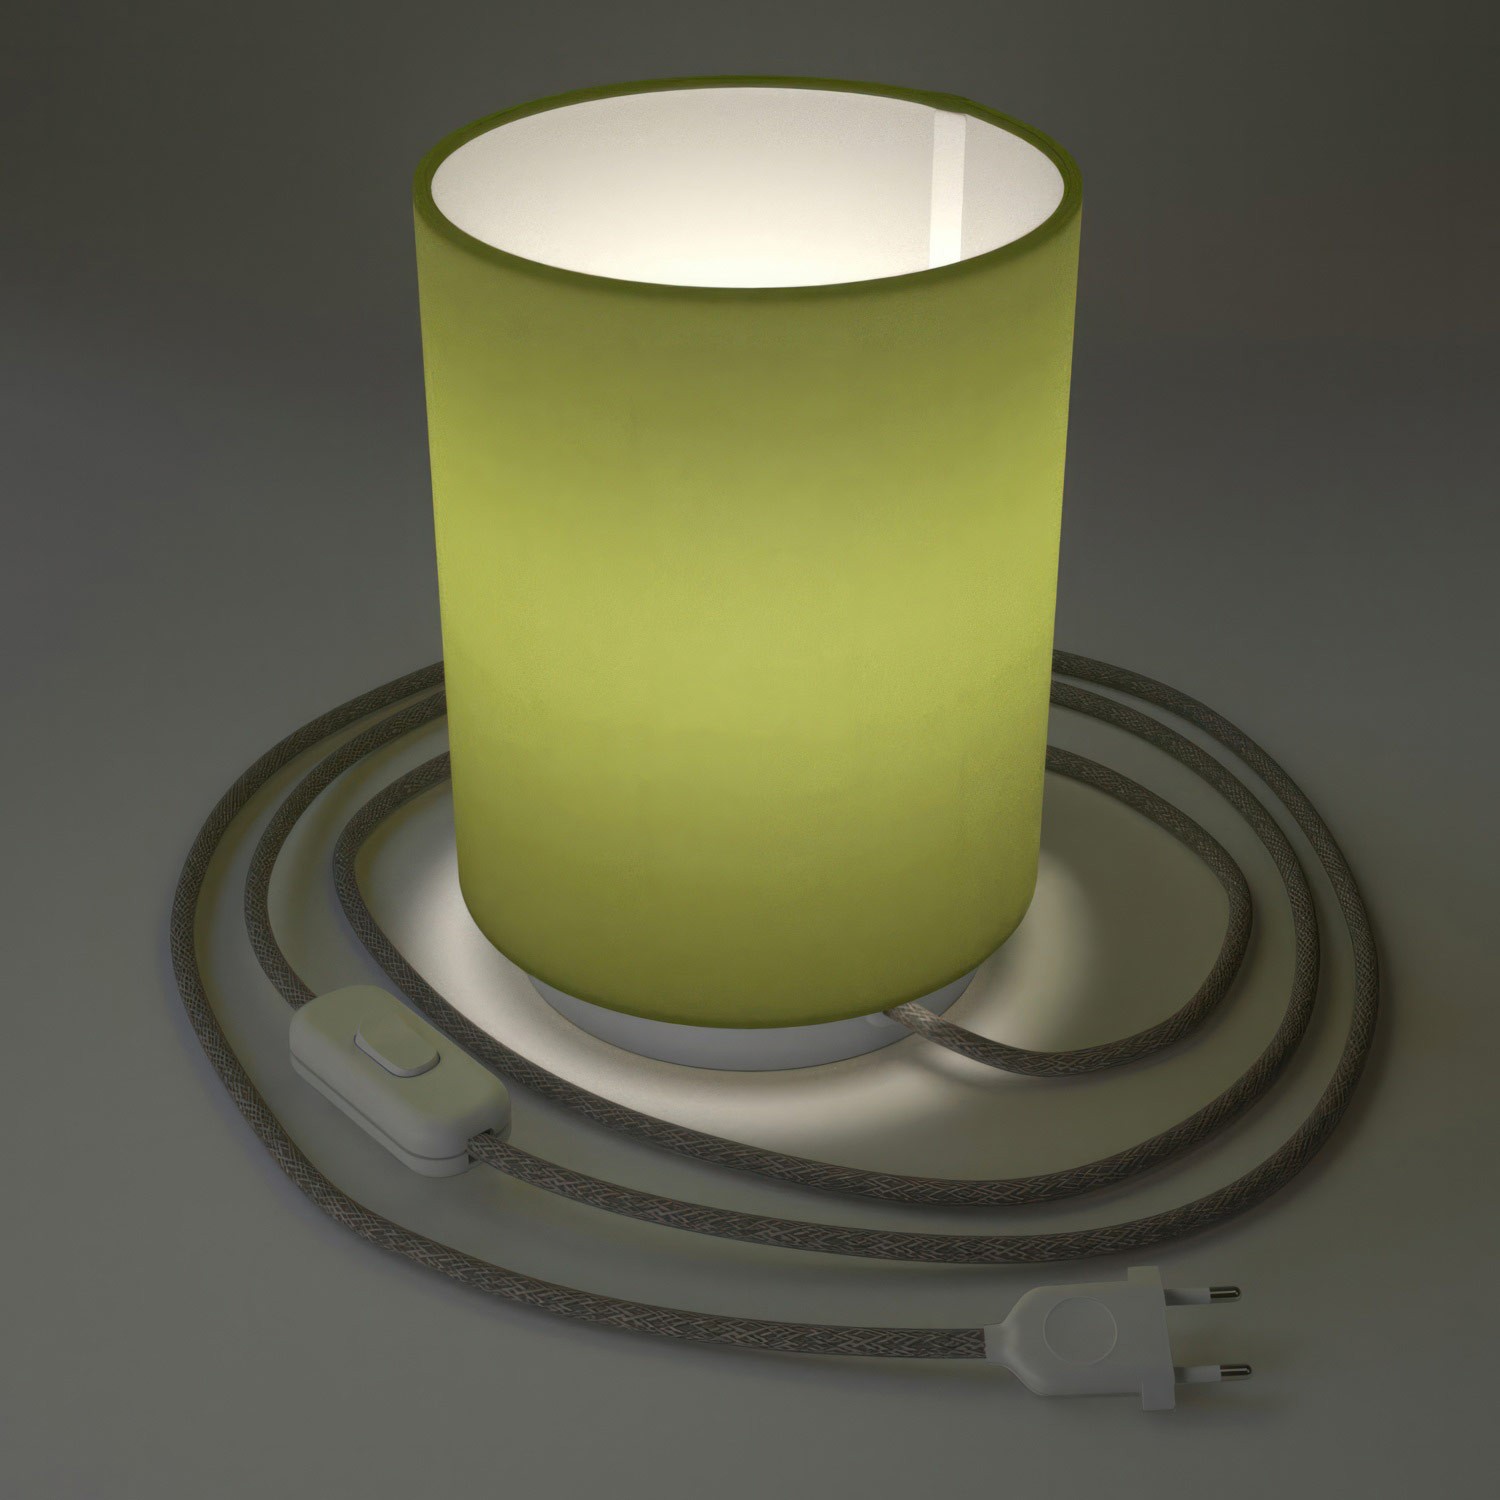 Posaluce in metal with Olive Green Canvas Cilindro lampshade, complete with fabric cable, switch and 2-pin plug